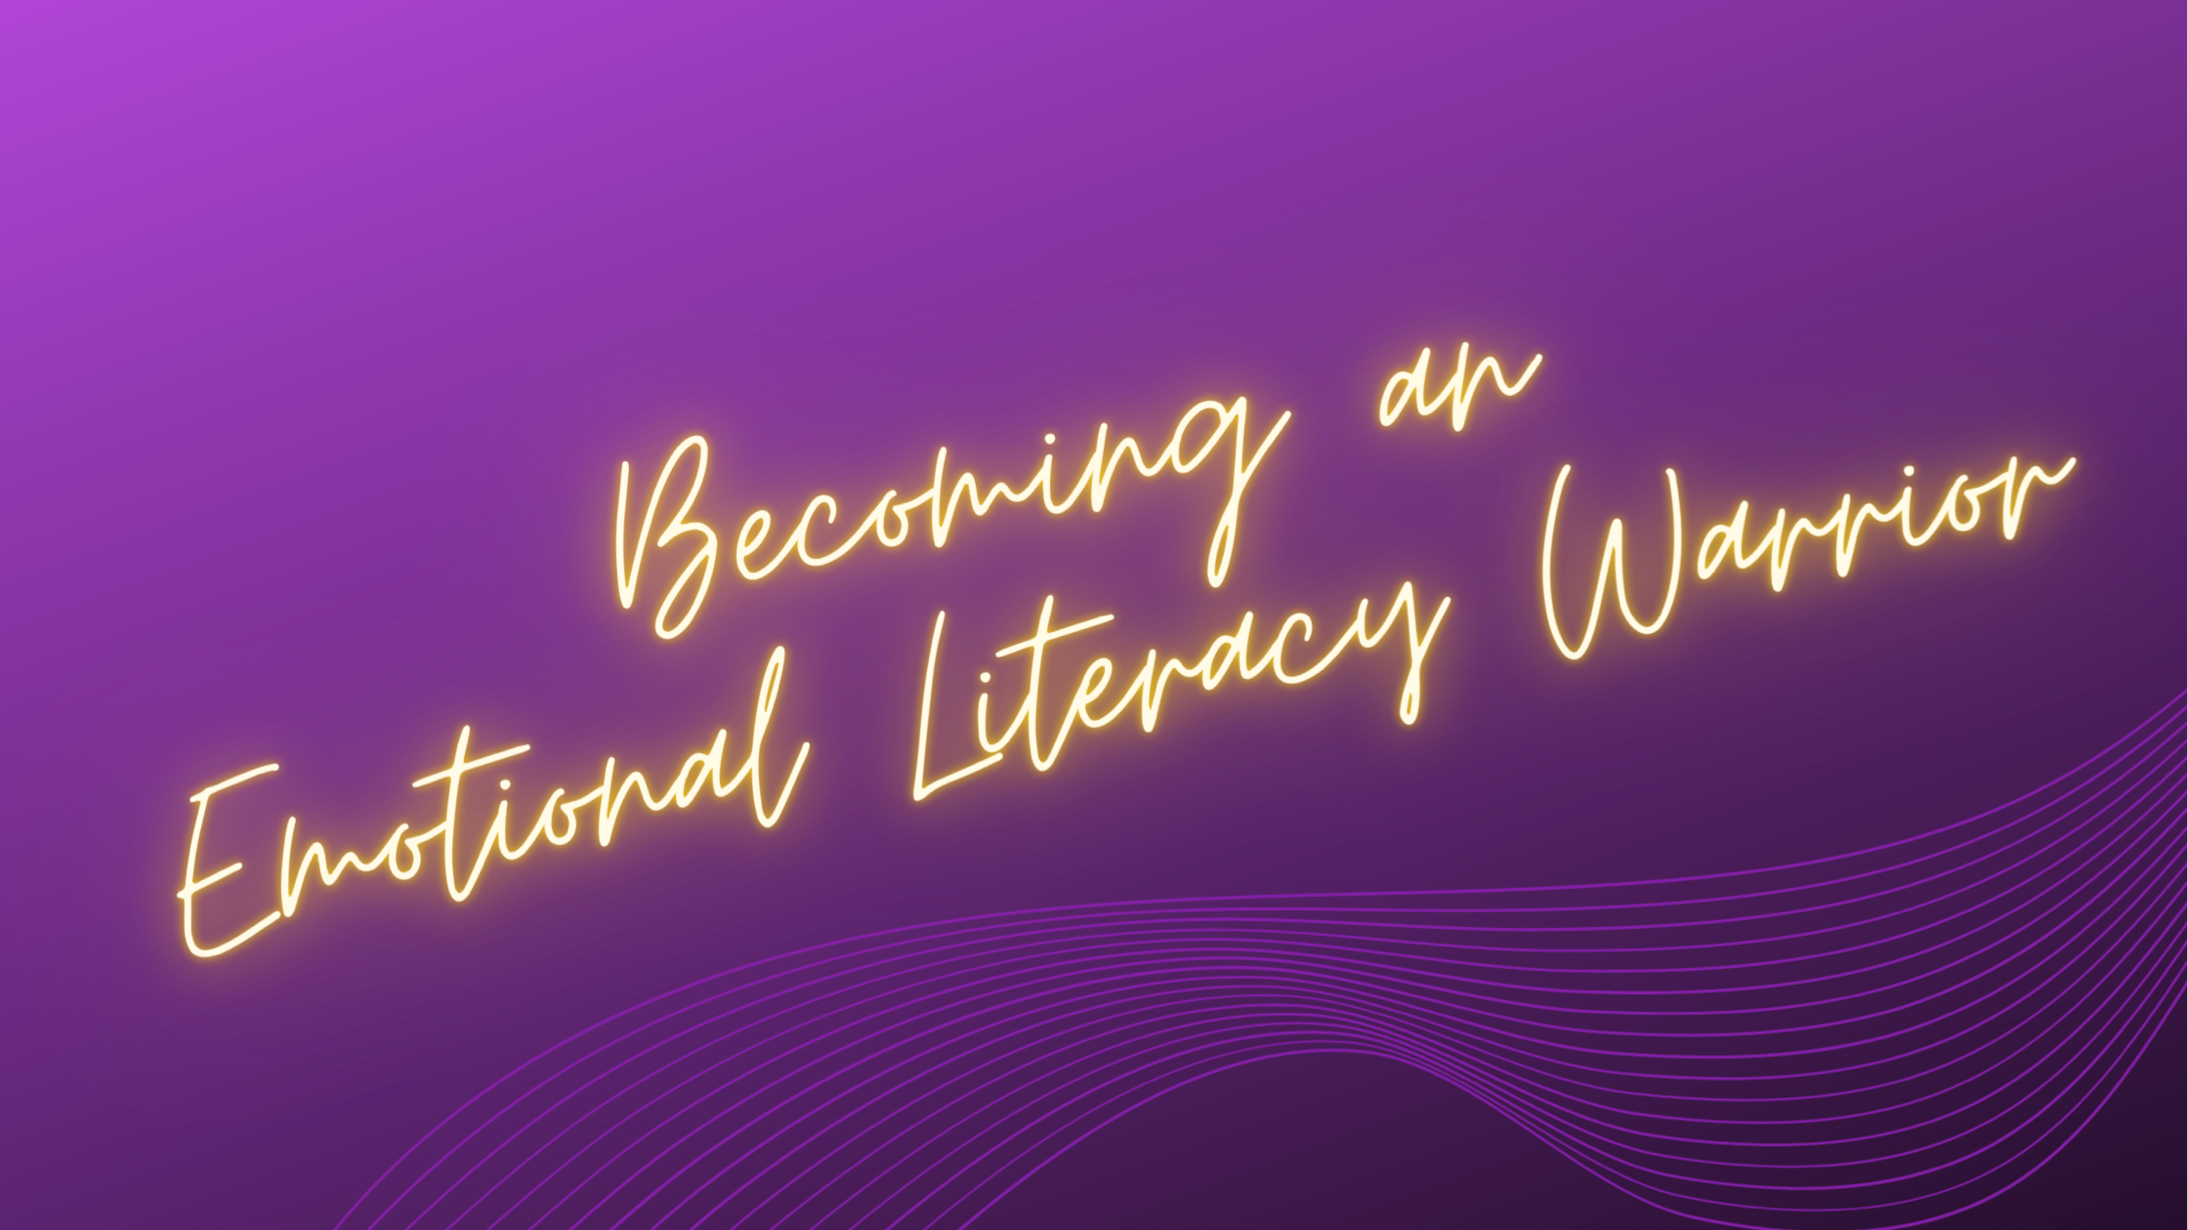 Banner image for Becoming an Emotional Literacy Warrior.